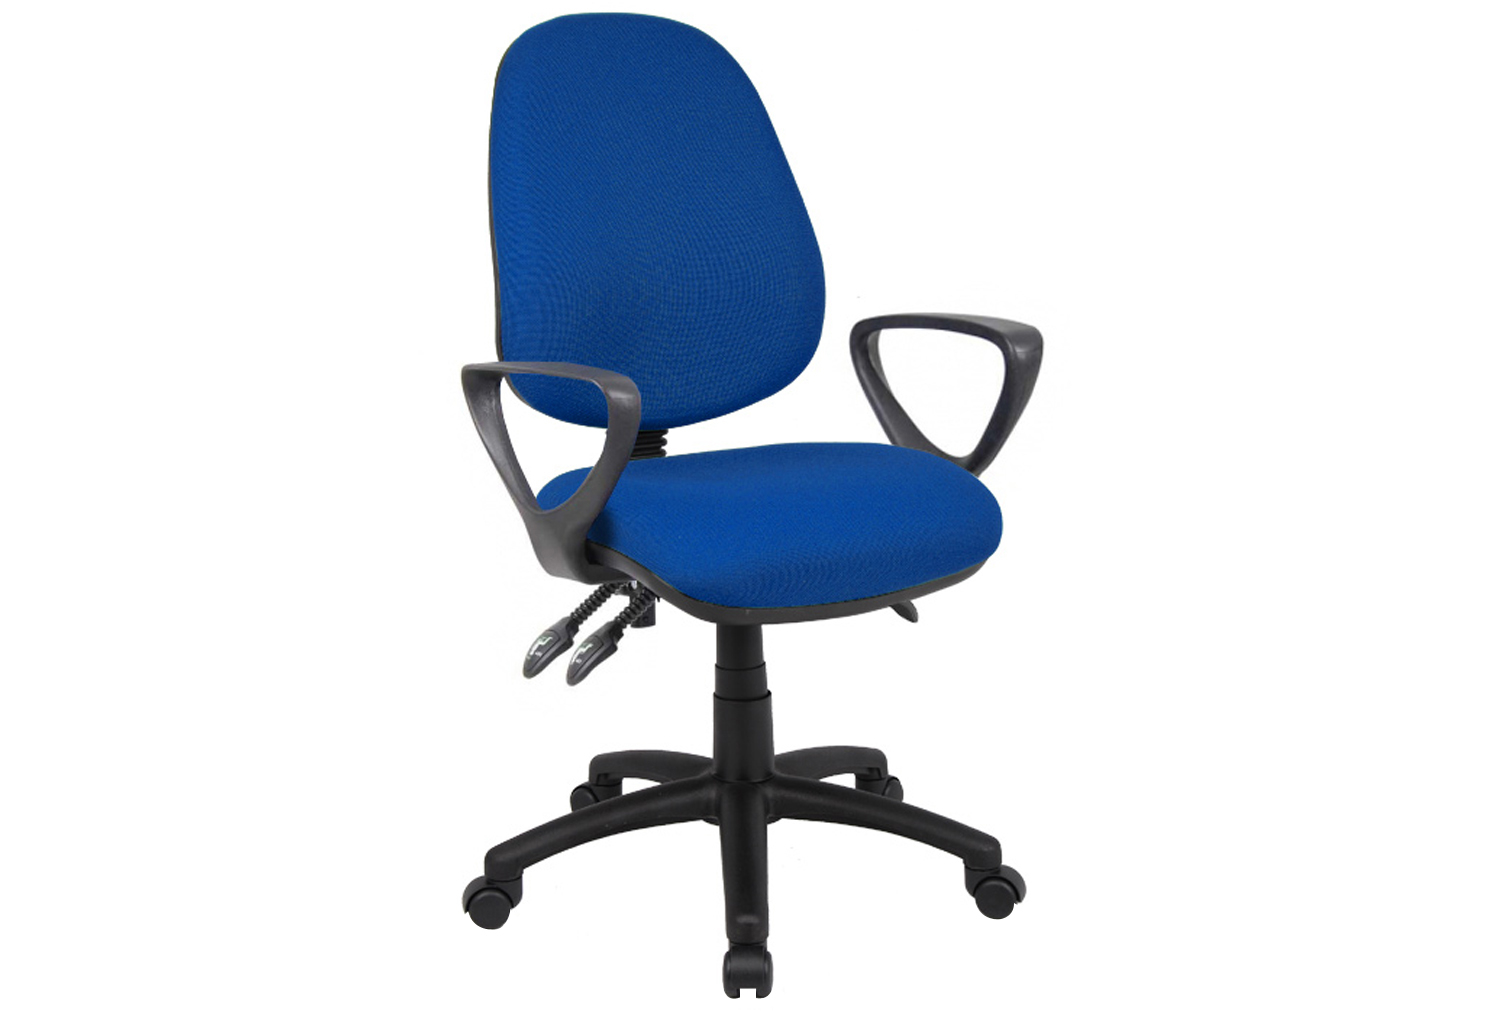 Full Lumbar 3 Lever Operator Office Chair With Fixed Arms, Blue, Express Delivery